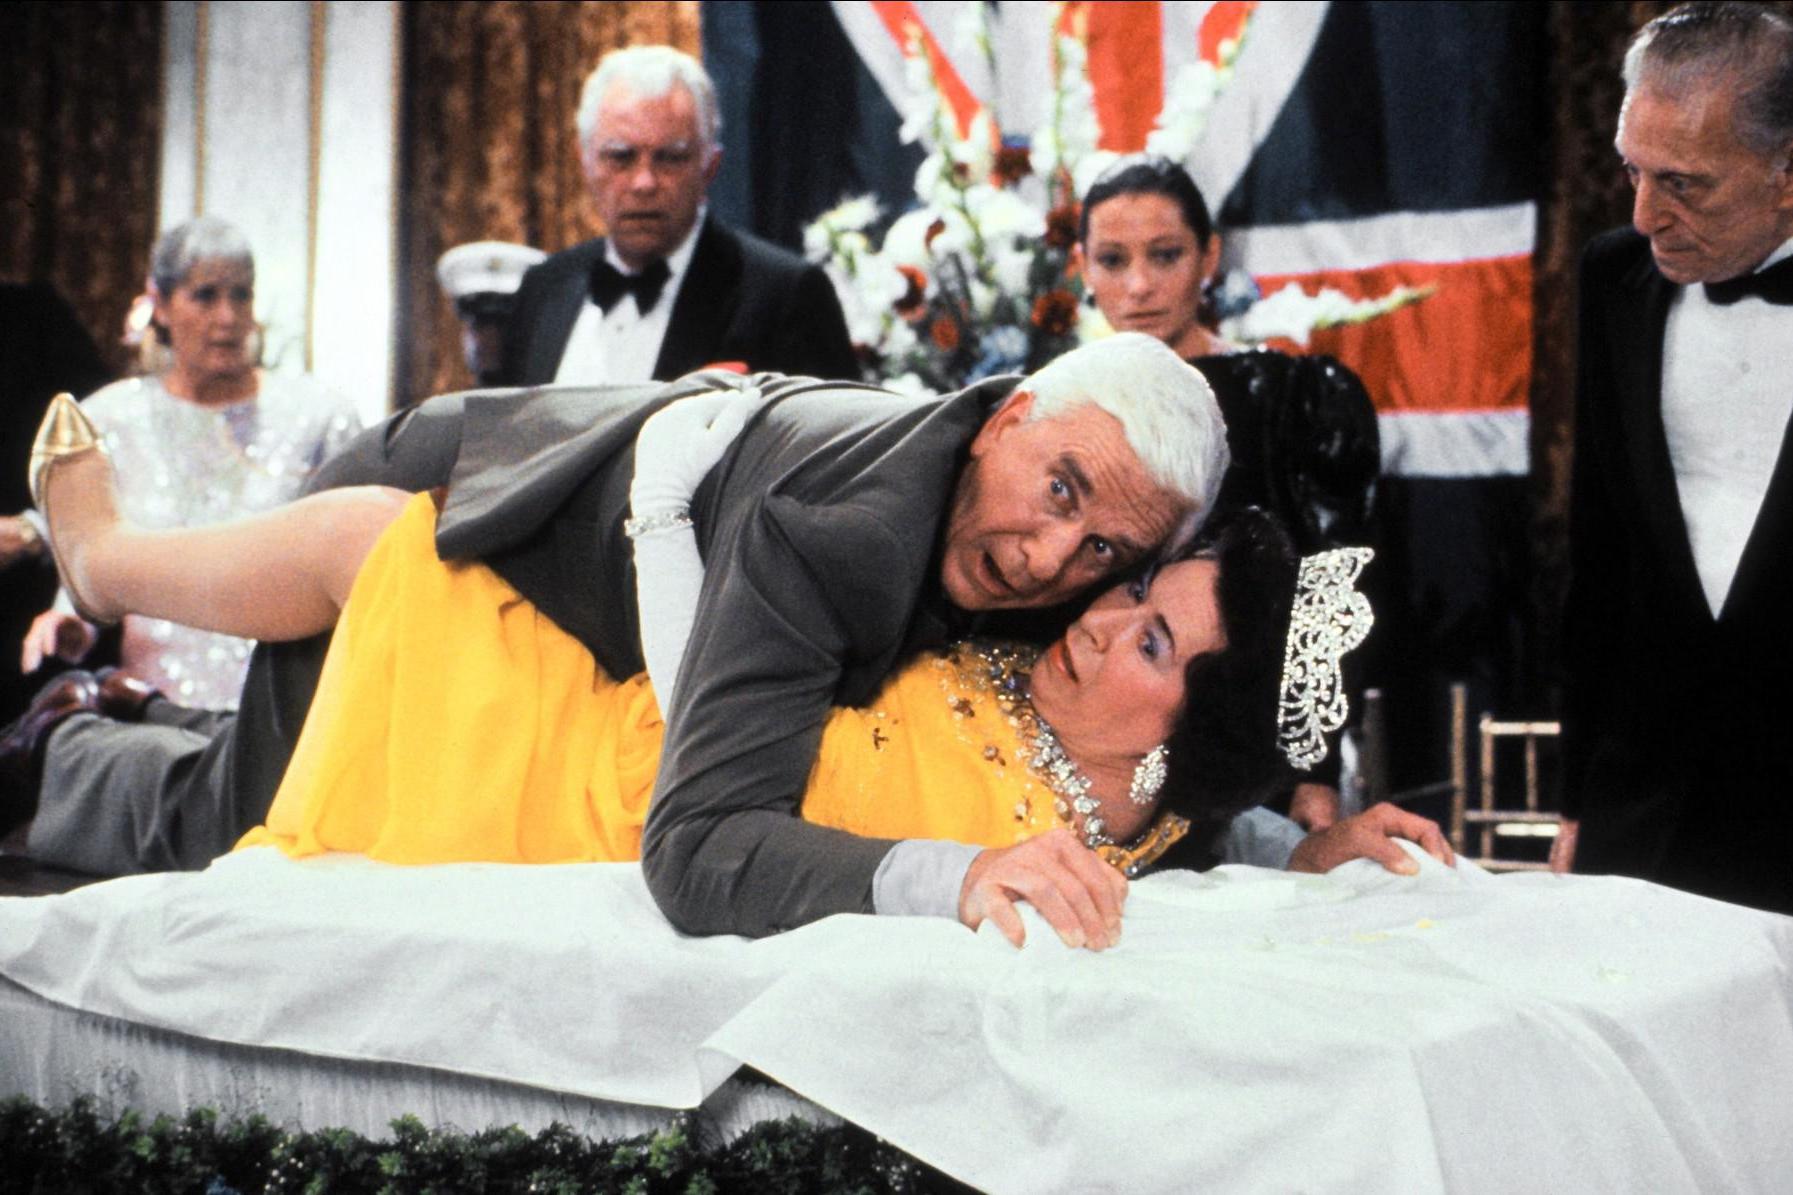 Charles’s famous Naked Gun scene with Leslie Nielsen. She was in demand from comedians on both sides of the Atlantic